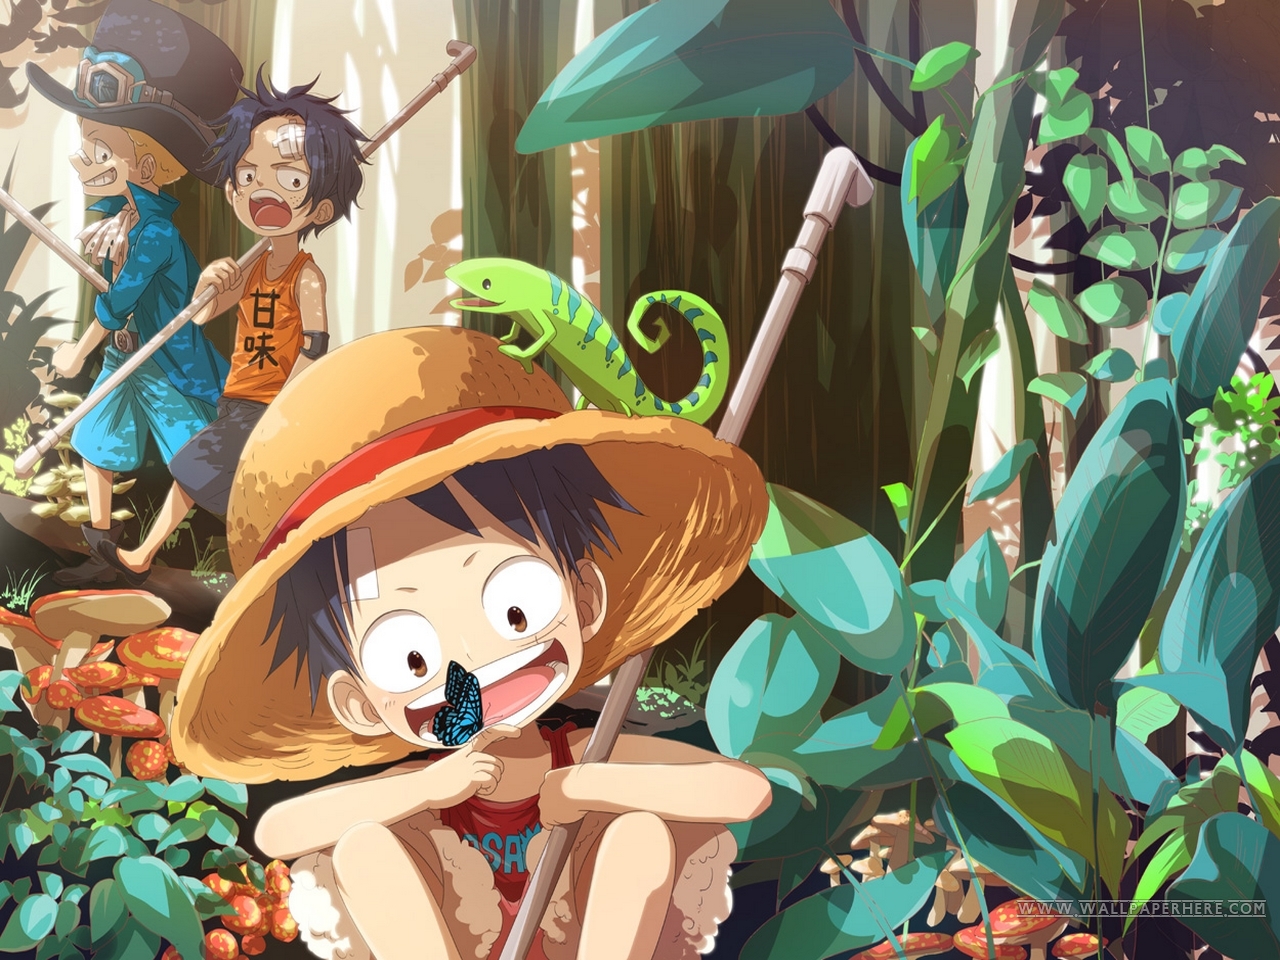 10 Gorgeous One Piece Anime HD Wallpapers   Design Hey Design Hey 1280x960